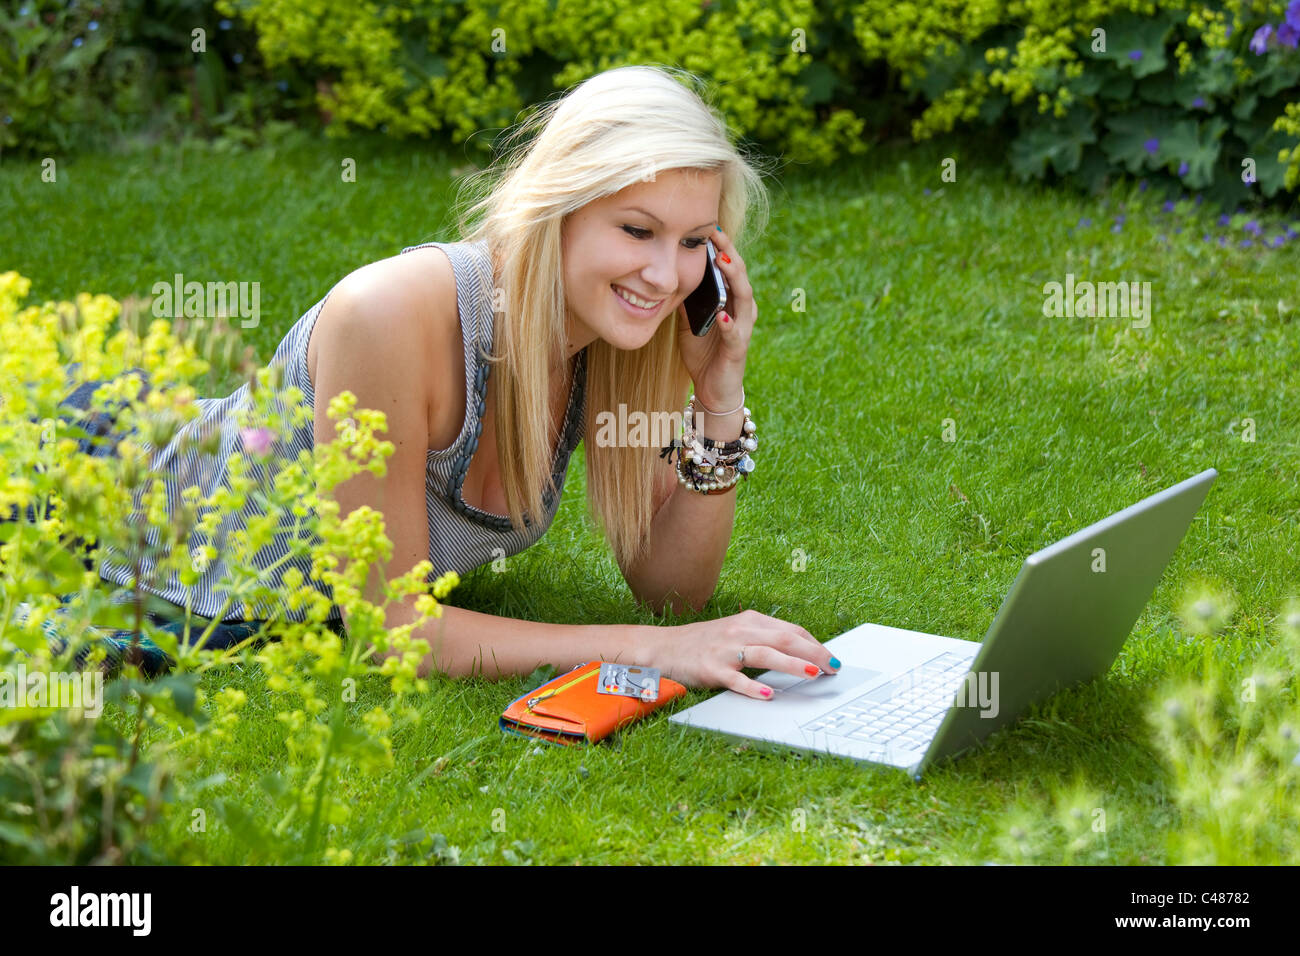 young girl on moblie phone while on the internet, chatting and socializing on wireless laptop computer in the garden Stock Photo